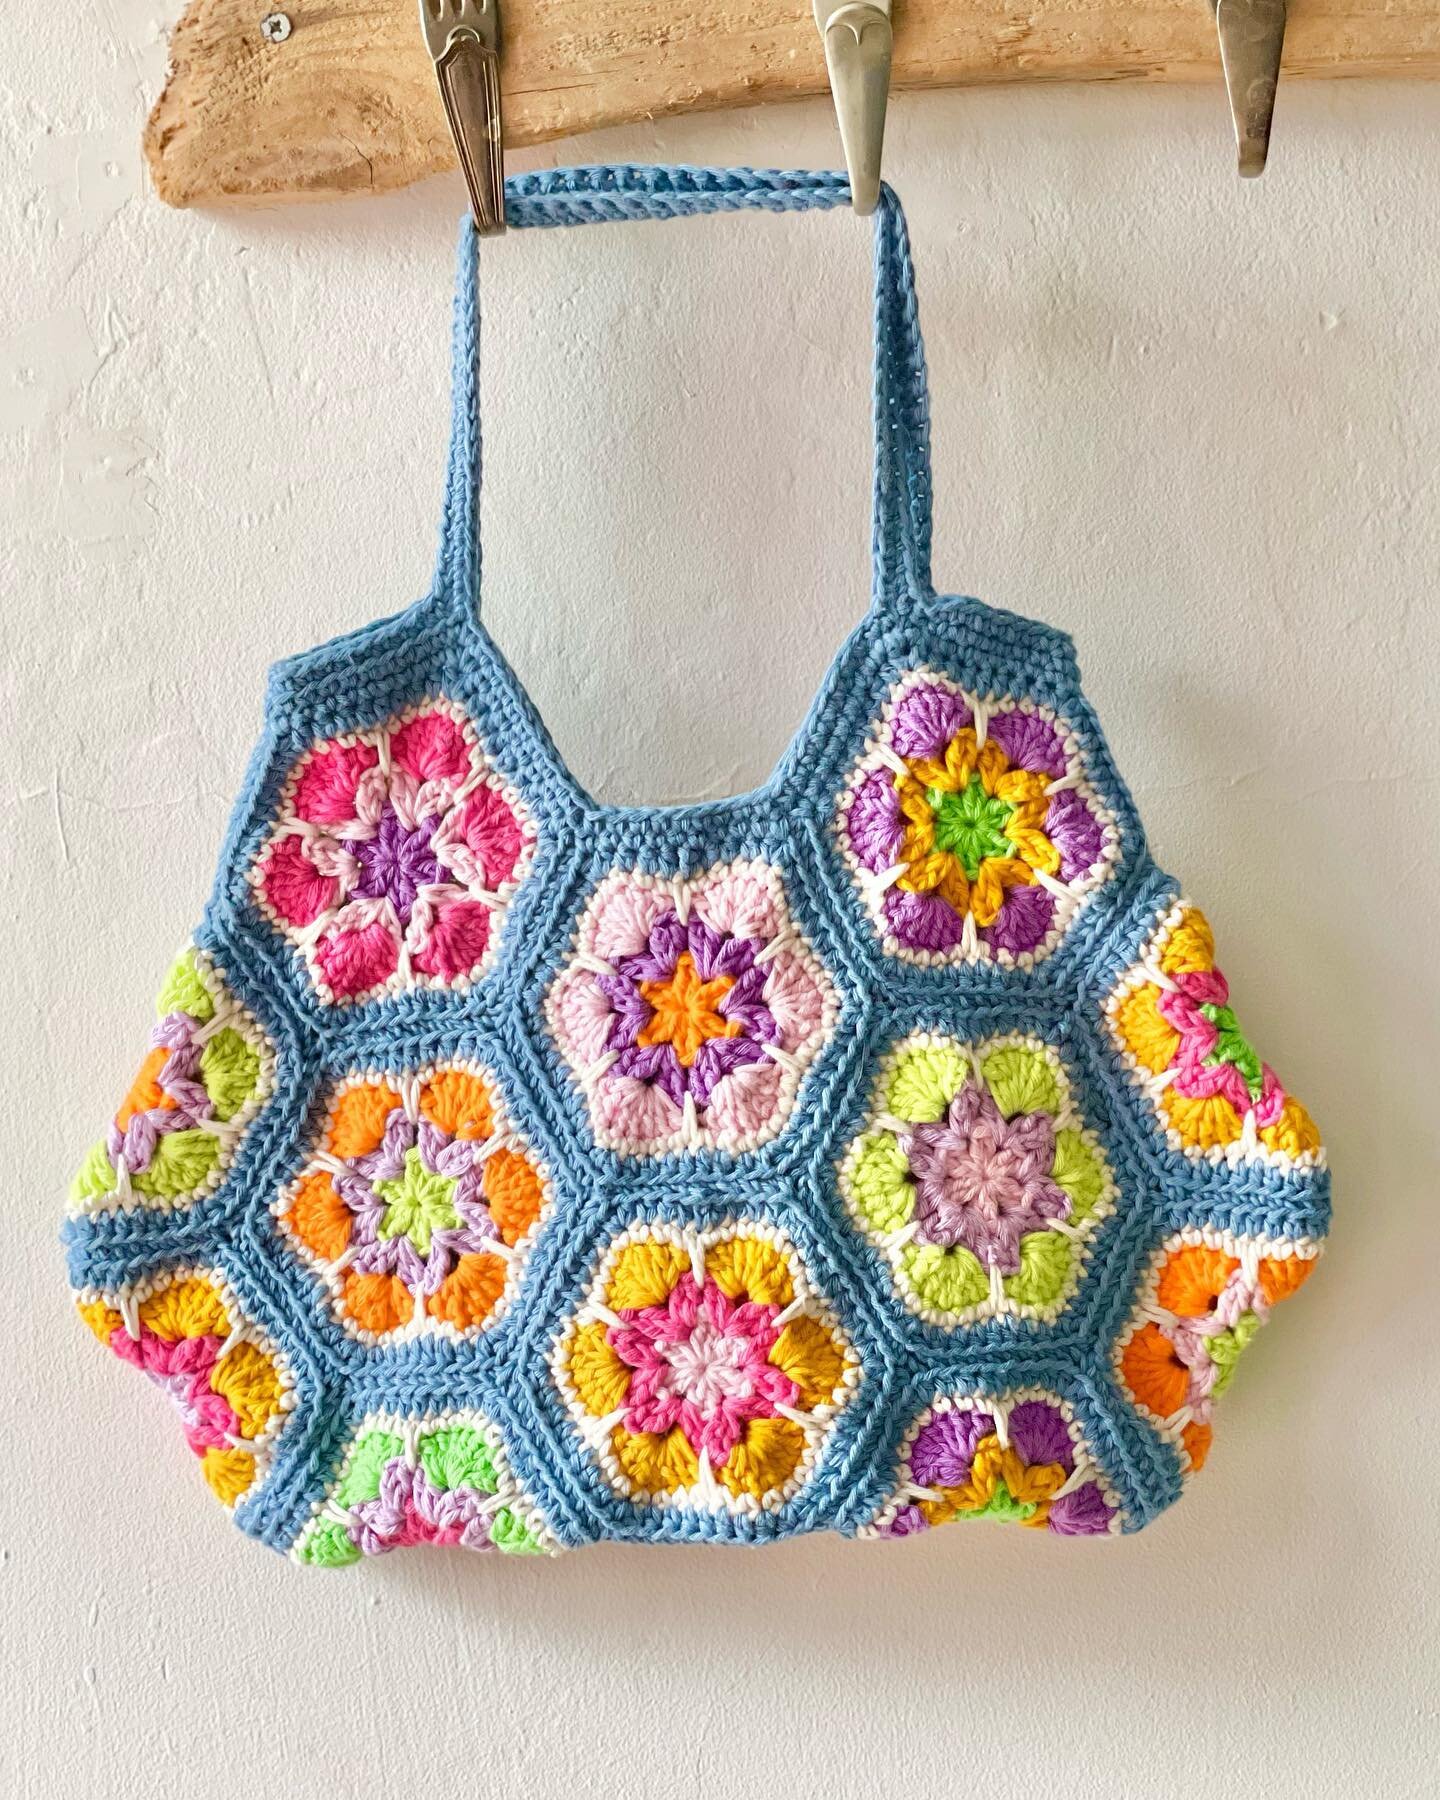 Does anyone know who originated the African Flower Motif? It&rsquo;s become a bit of a timeless classic and issue 124 of @simplycrochetmag has a whole host designs that use it to the max. 

This little bag is my contribution and I am loving the denim